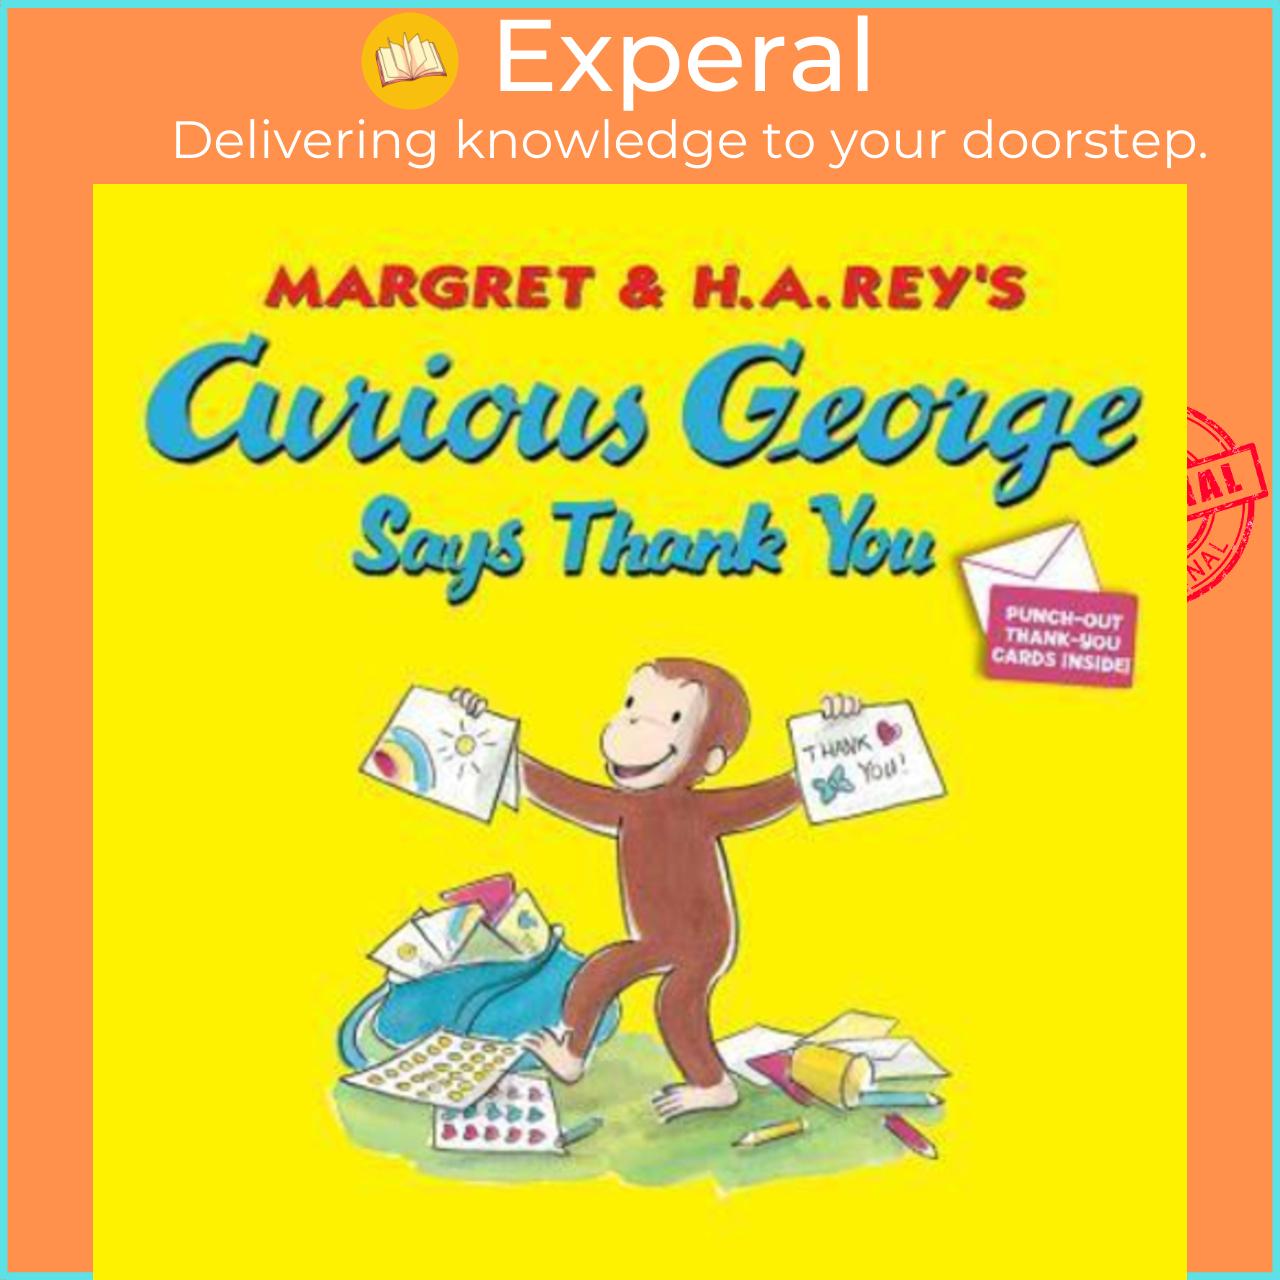 Sách - Curious George Says Thank You by H. A. Rey (US edition, paperback)